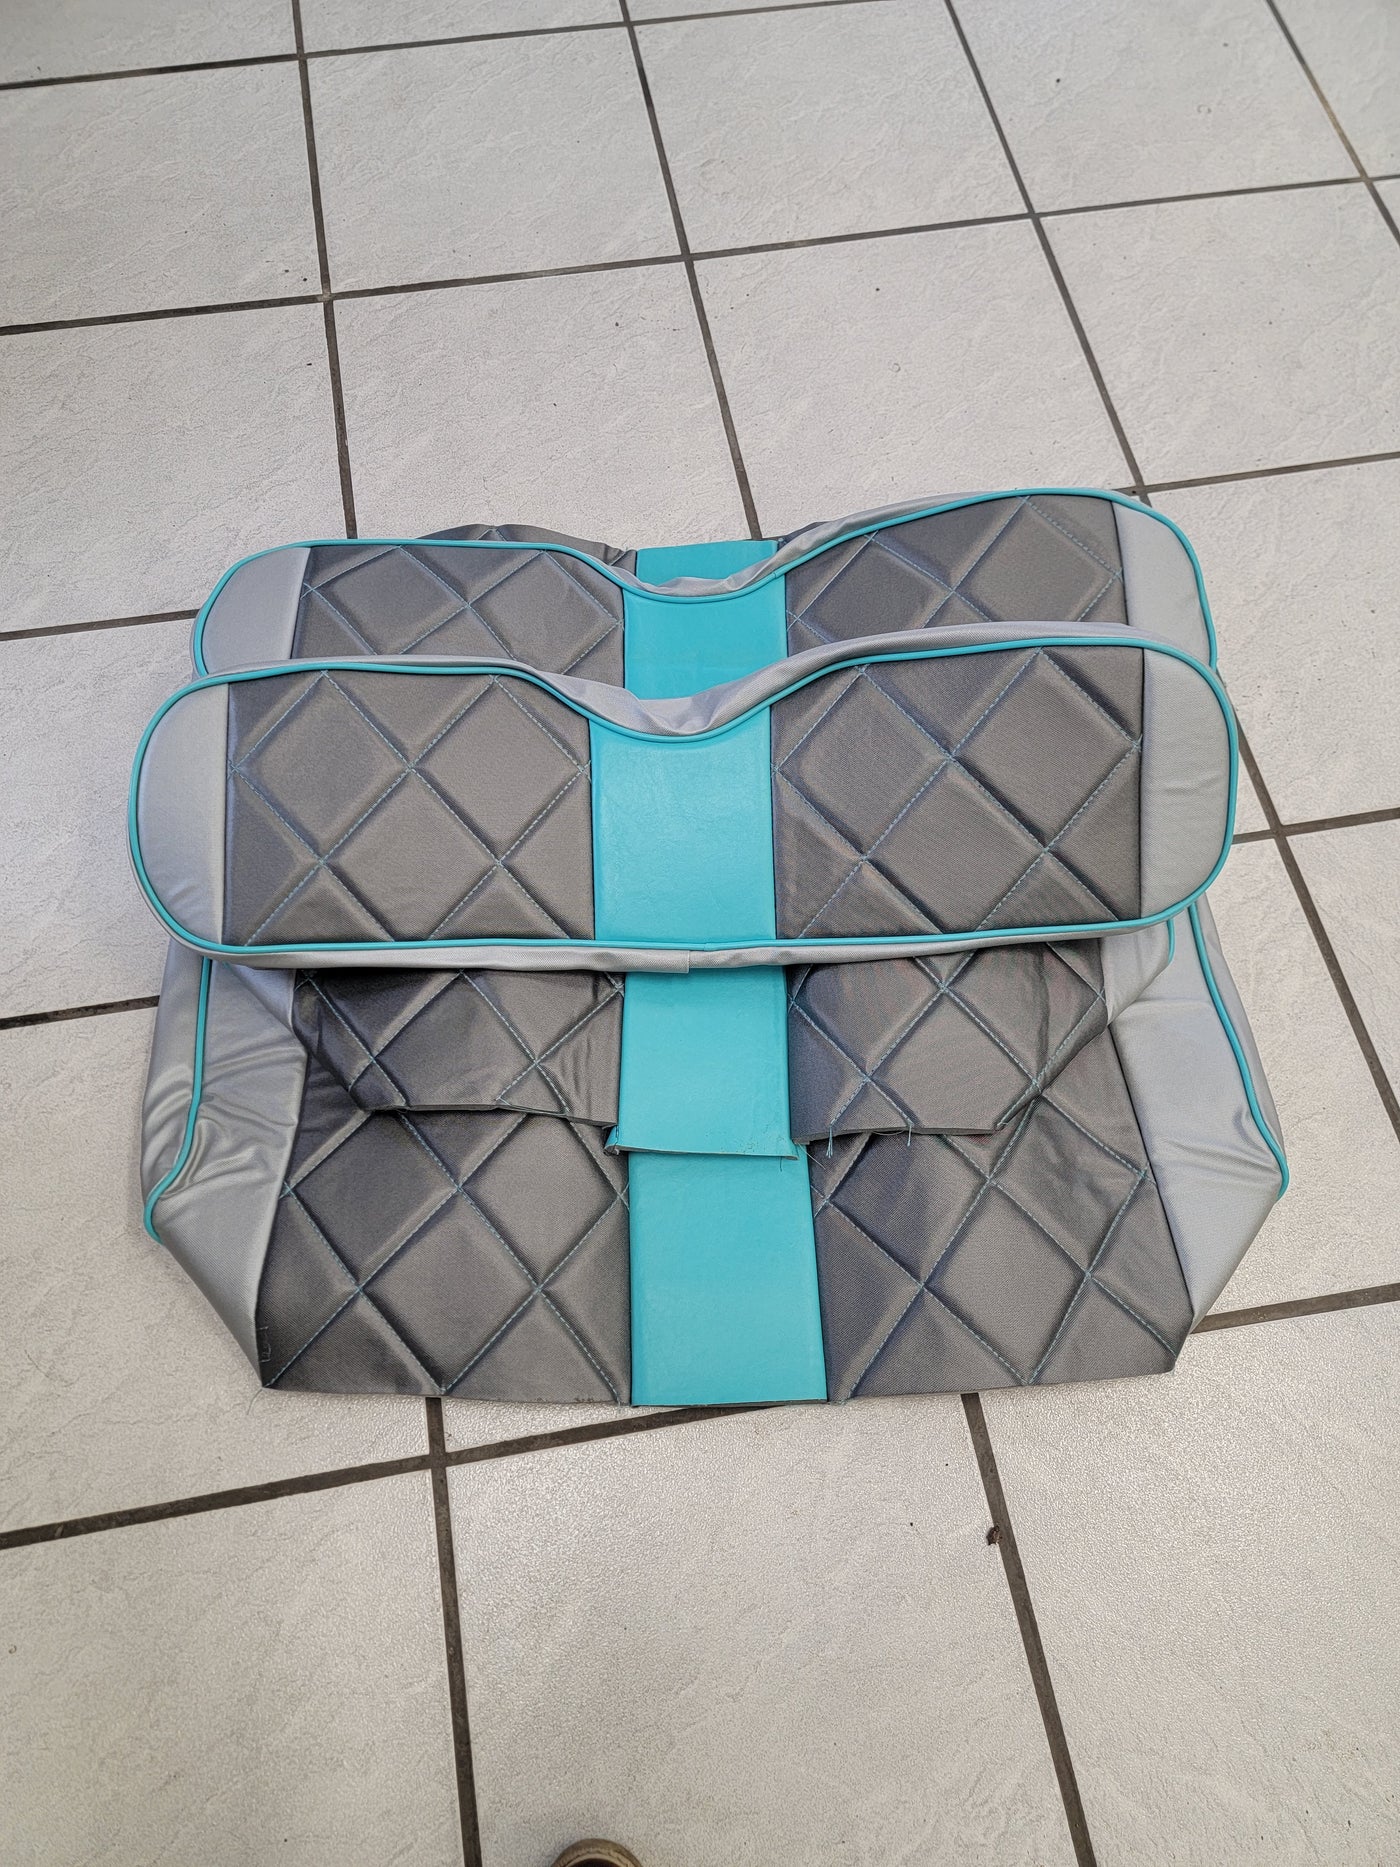 Custom Diamond Stich Charcoal Grey & Silver Carbon w/ Teal Stripe & Pipe Ez-Go (Ezgo) Txt/Rxv(1996-current) or Club Car DS 2000-2013 Cart Front Rear Seat Covers